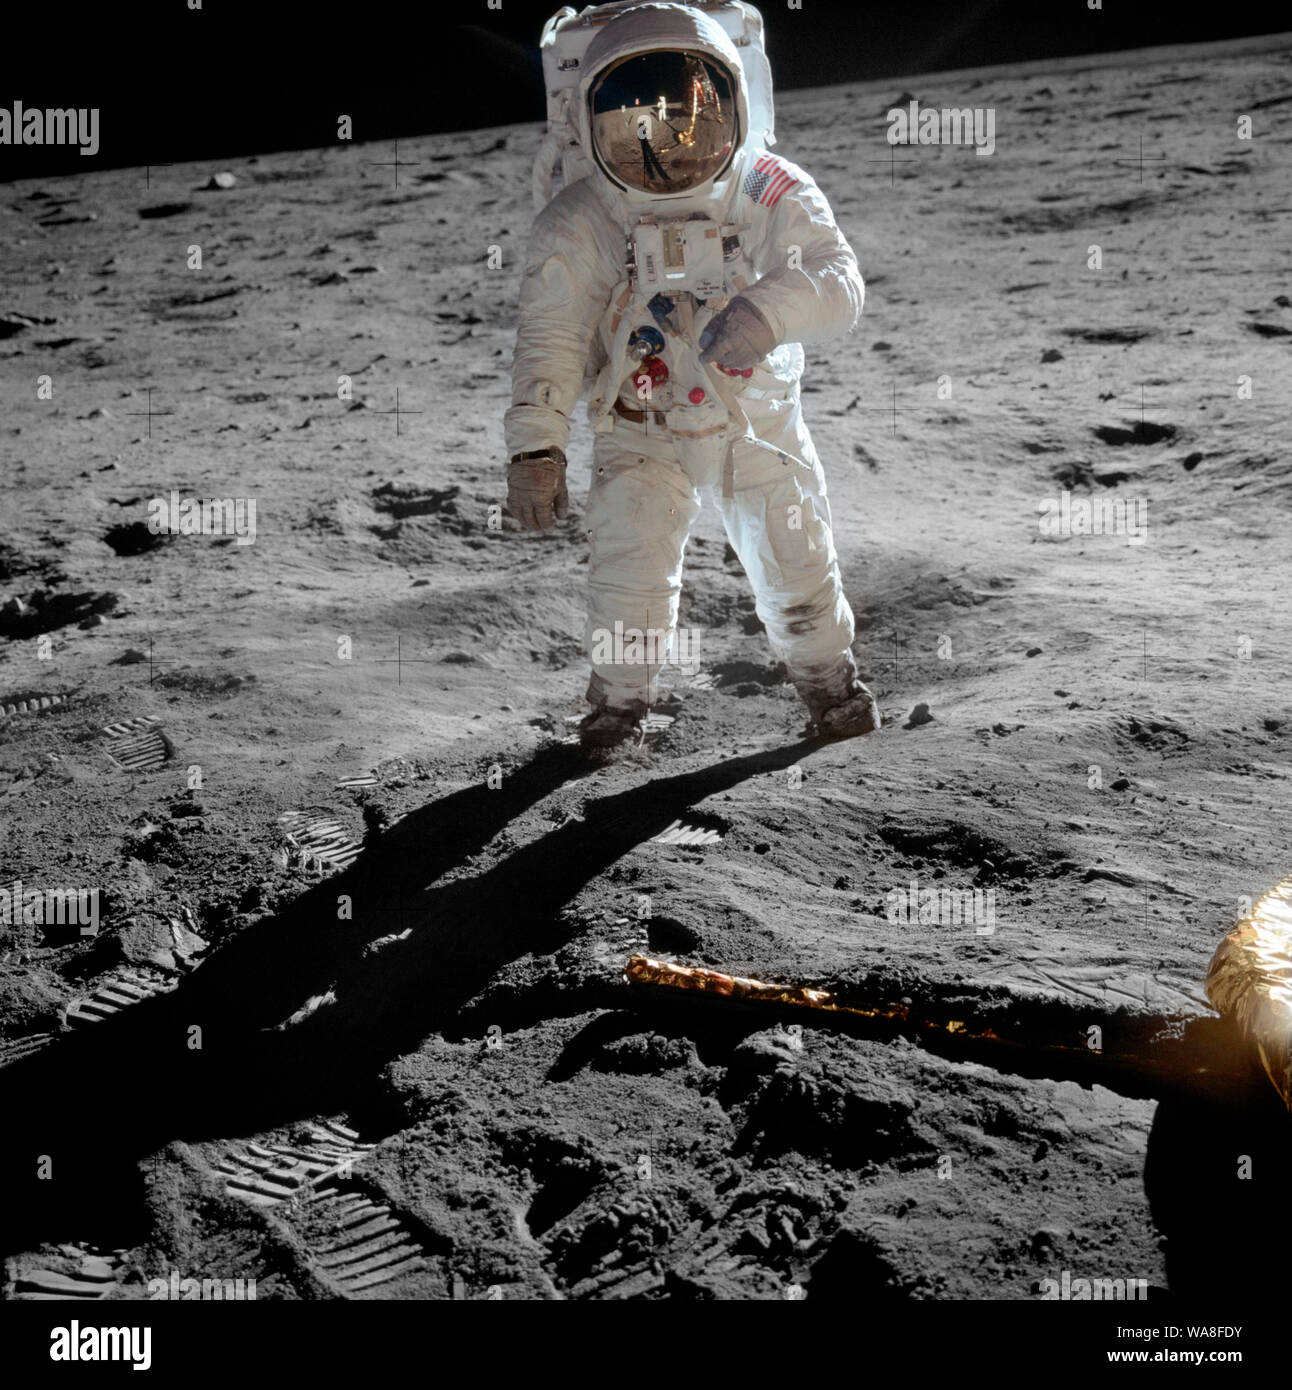 Astronaut Buzz Aldrin on the moon - Astronaut Buzz Aldrin, lunar module pilot, stands on the surface of the moon near the leg of the lunar module, Eagle, during the Apollo 11 moonwalk. Astronaut Neil Armstrong, mission commander, took this photograph with a 70mm lunar surface camera. While Armstrong and Aldrin descended in the lunar module to explore the Sea of Tranquility, astronaut Michael Collins, command module pilot, remained in lunar orbit with the Command and Service Module, Columbia. July 1969 Stock Photo